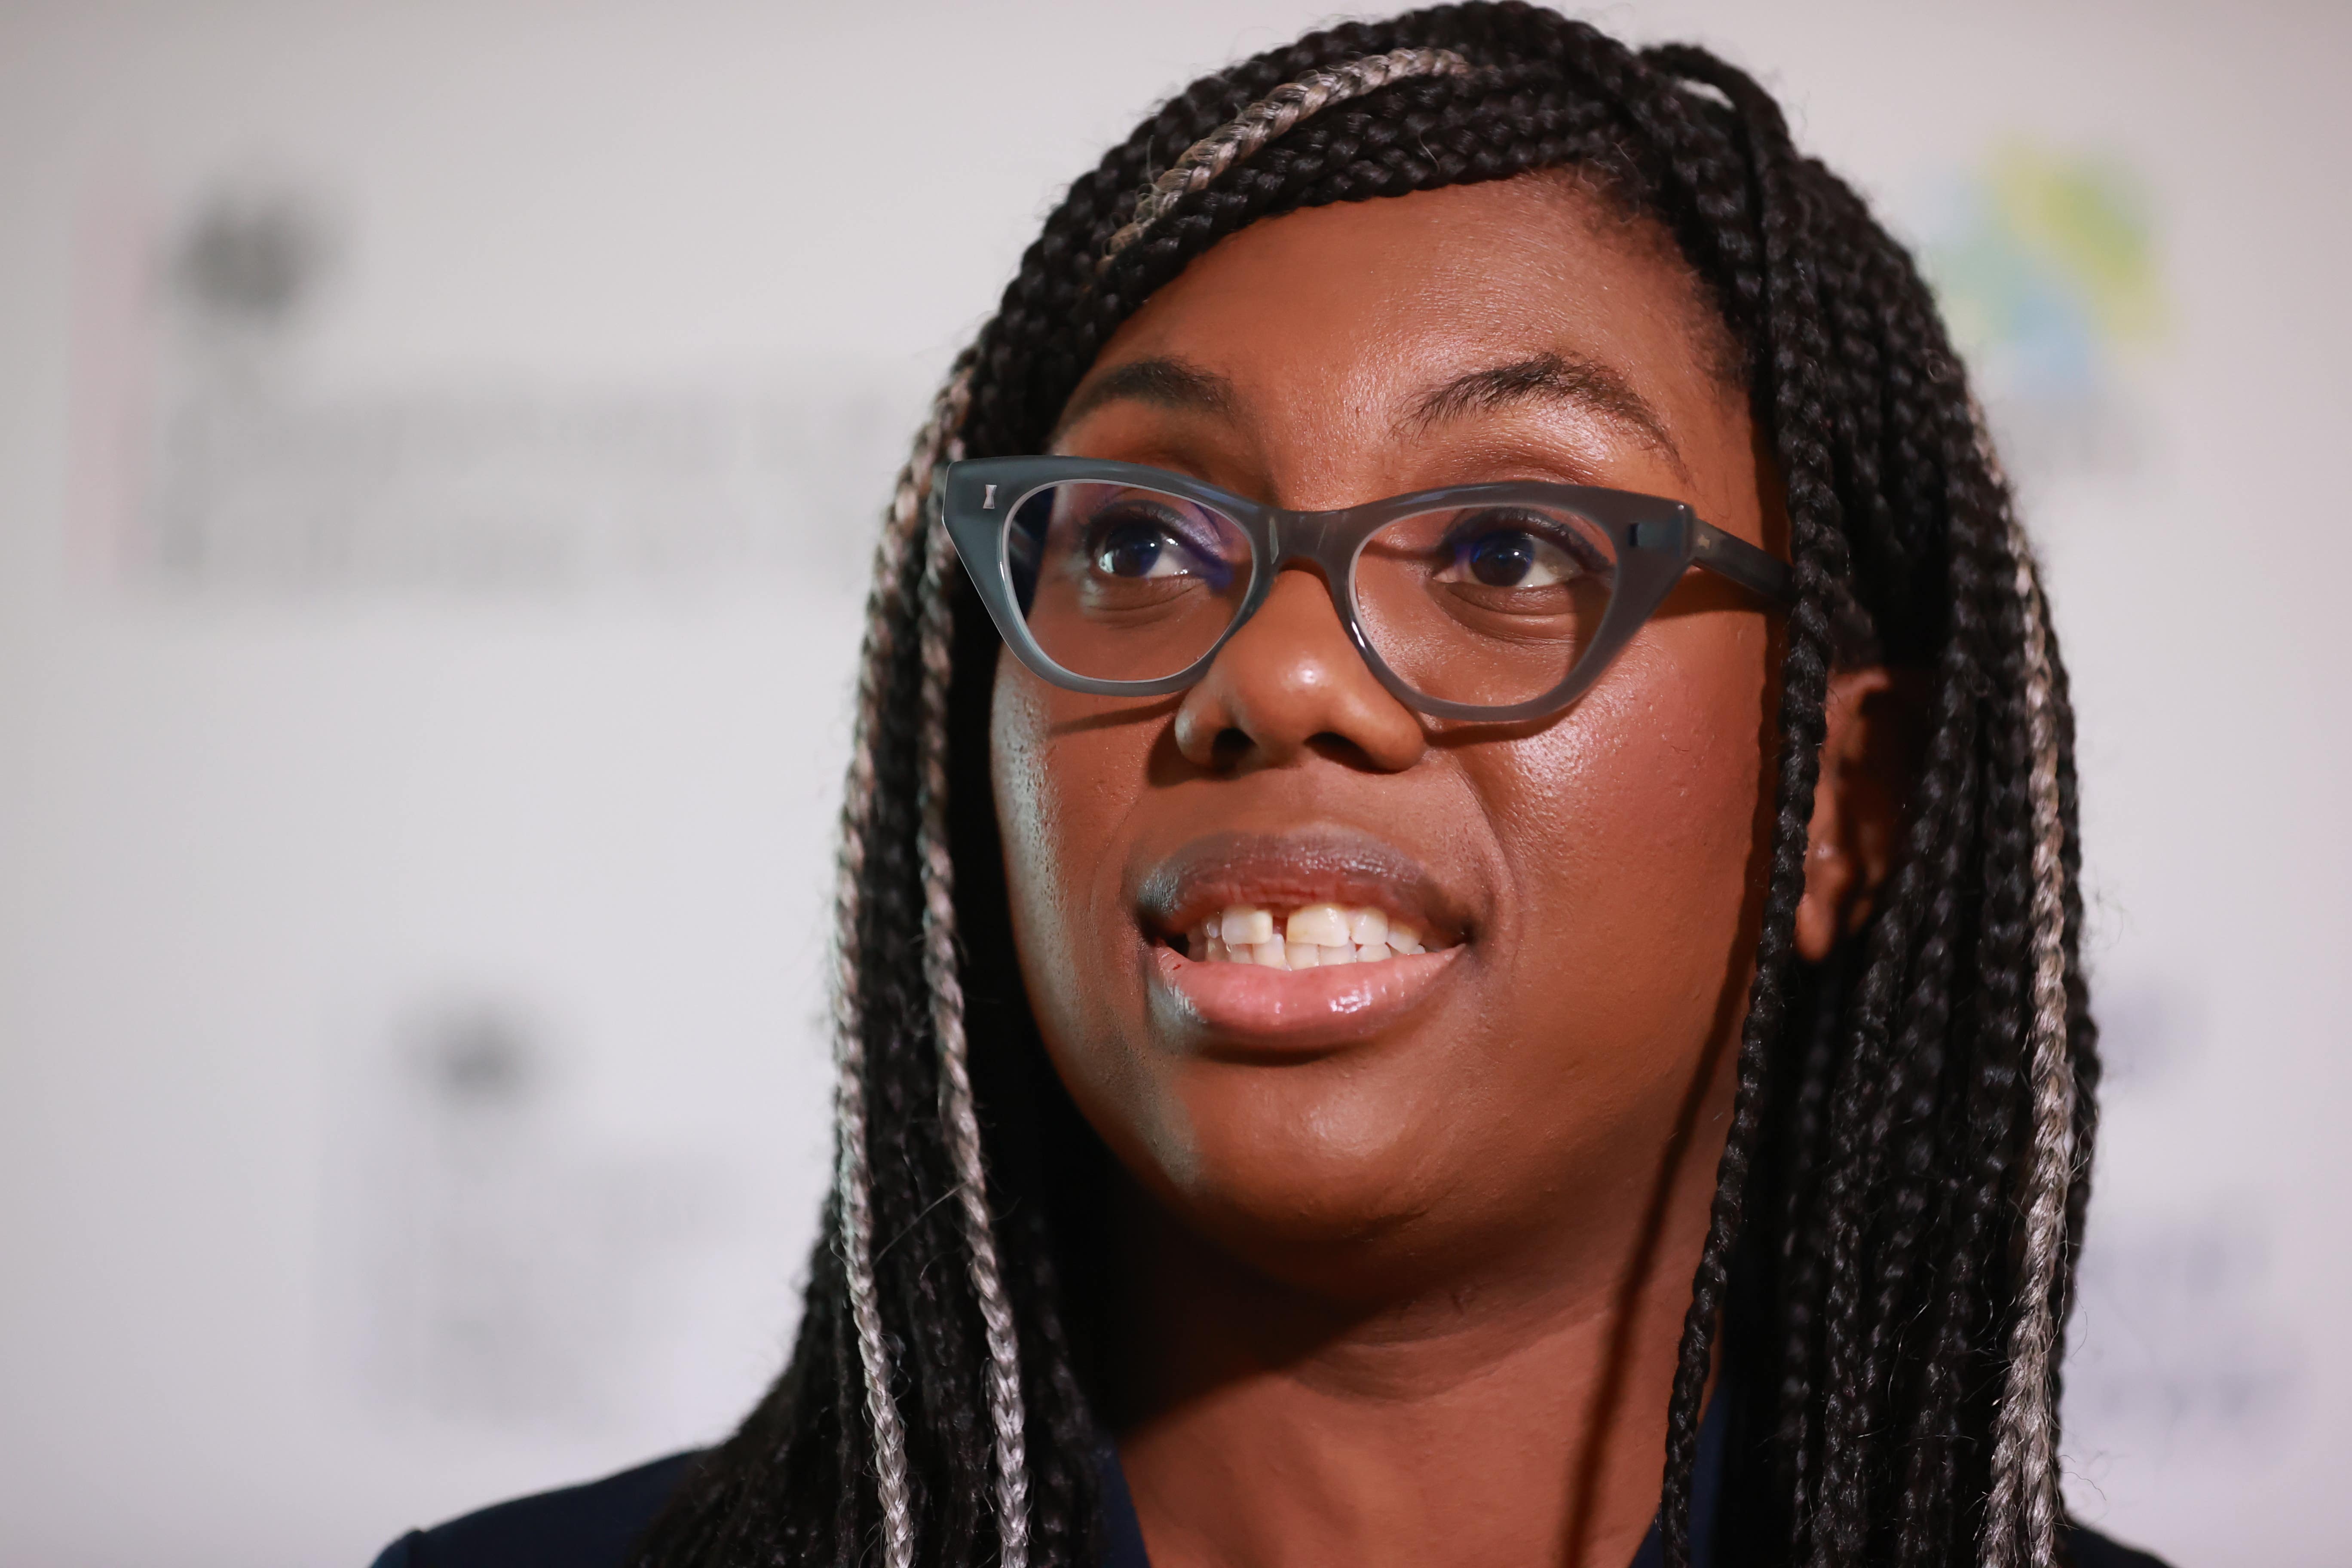 Though Kemi Badenoch cannot be sued over what she said in the Commons, she could be in relation to her tweets